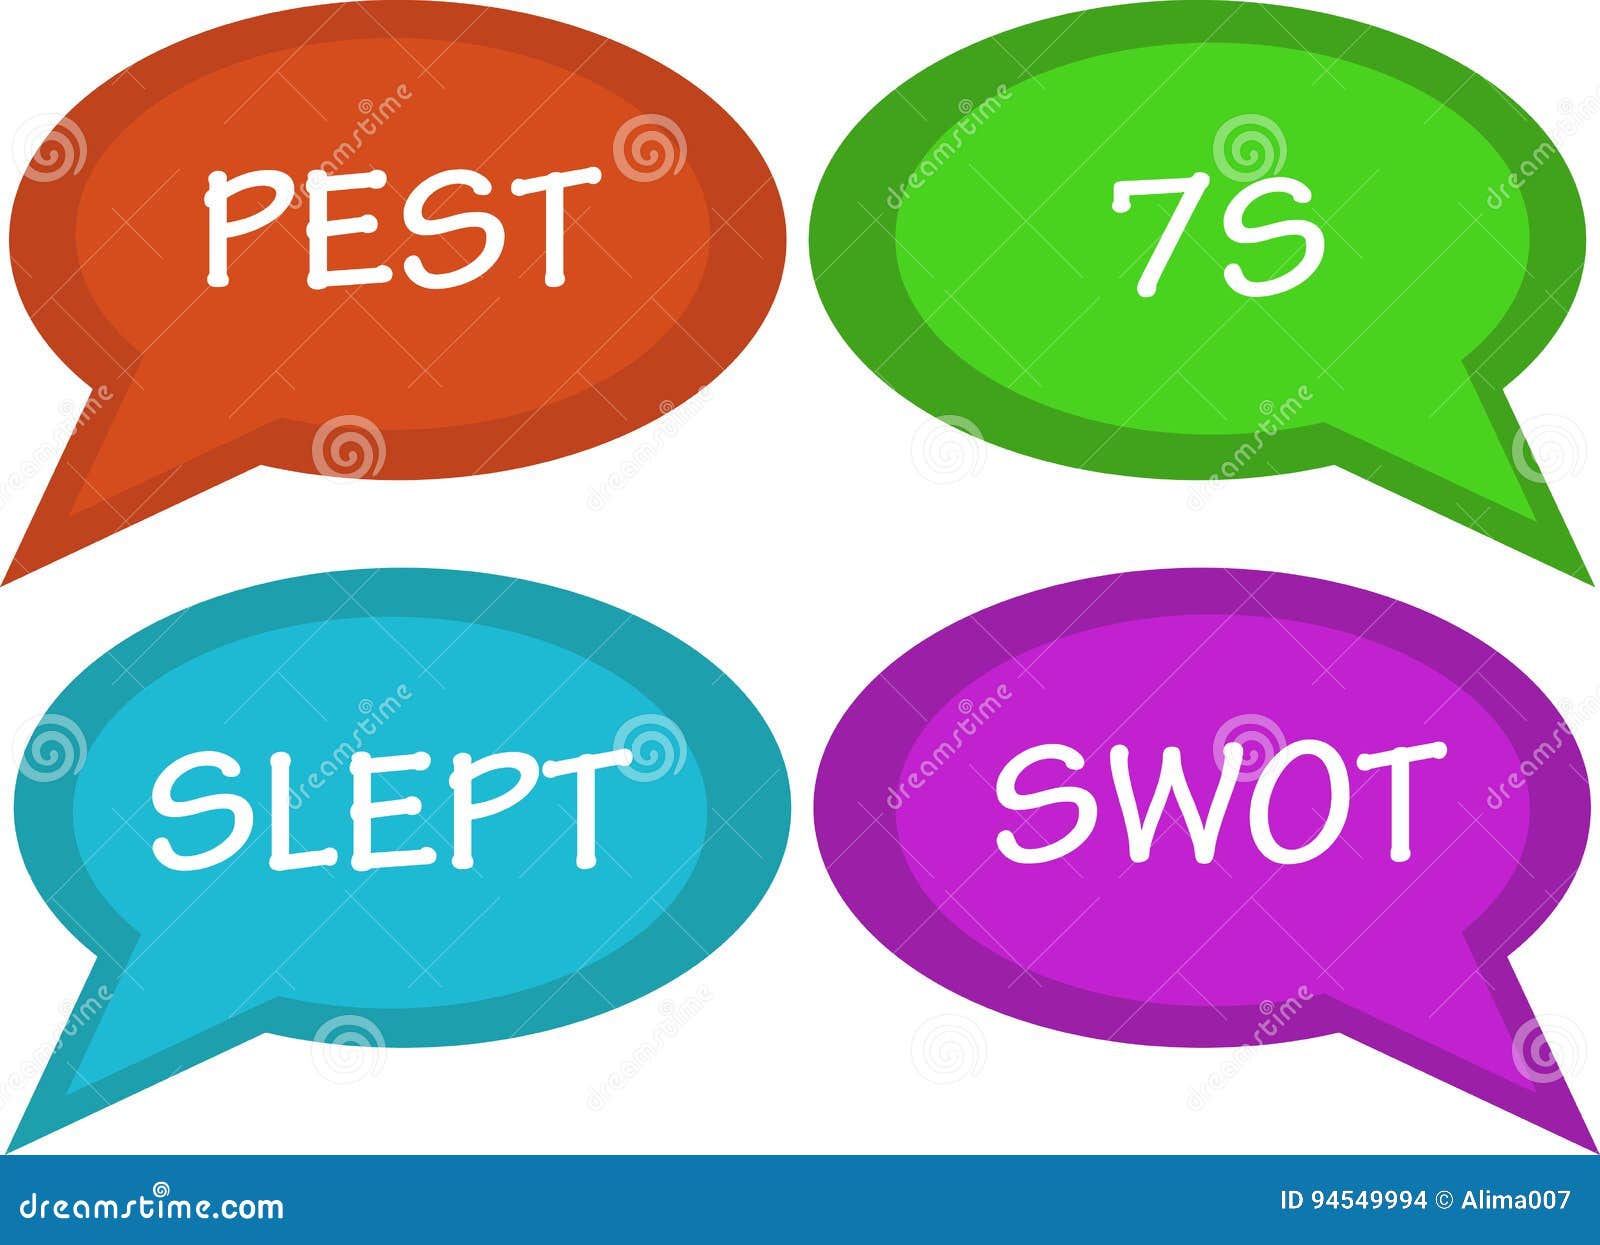 managerial analyzes in talk bubbles, swot, 7s, pest, slept